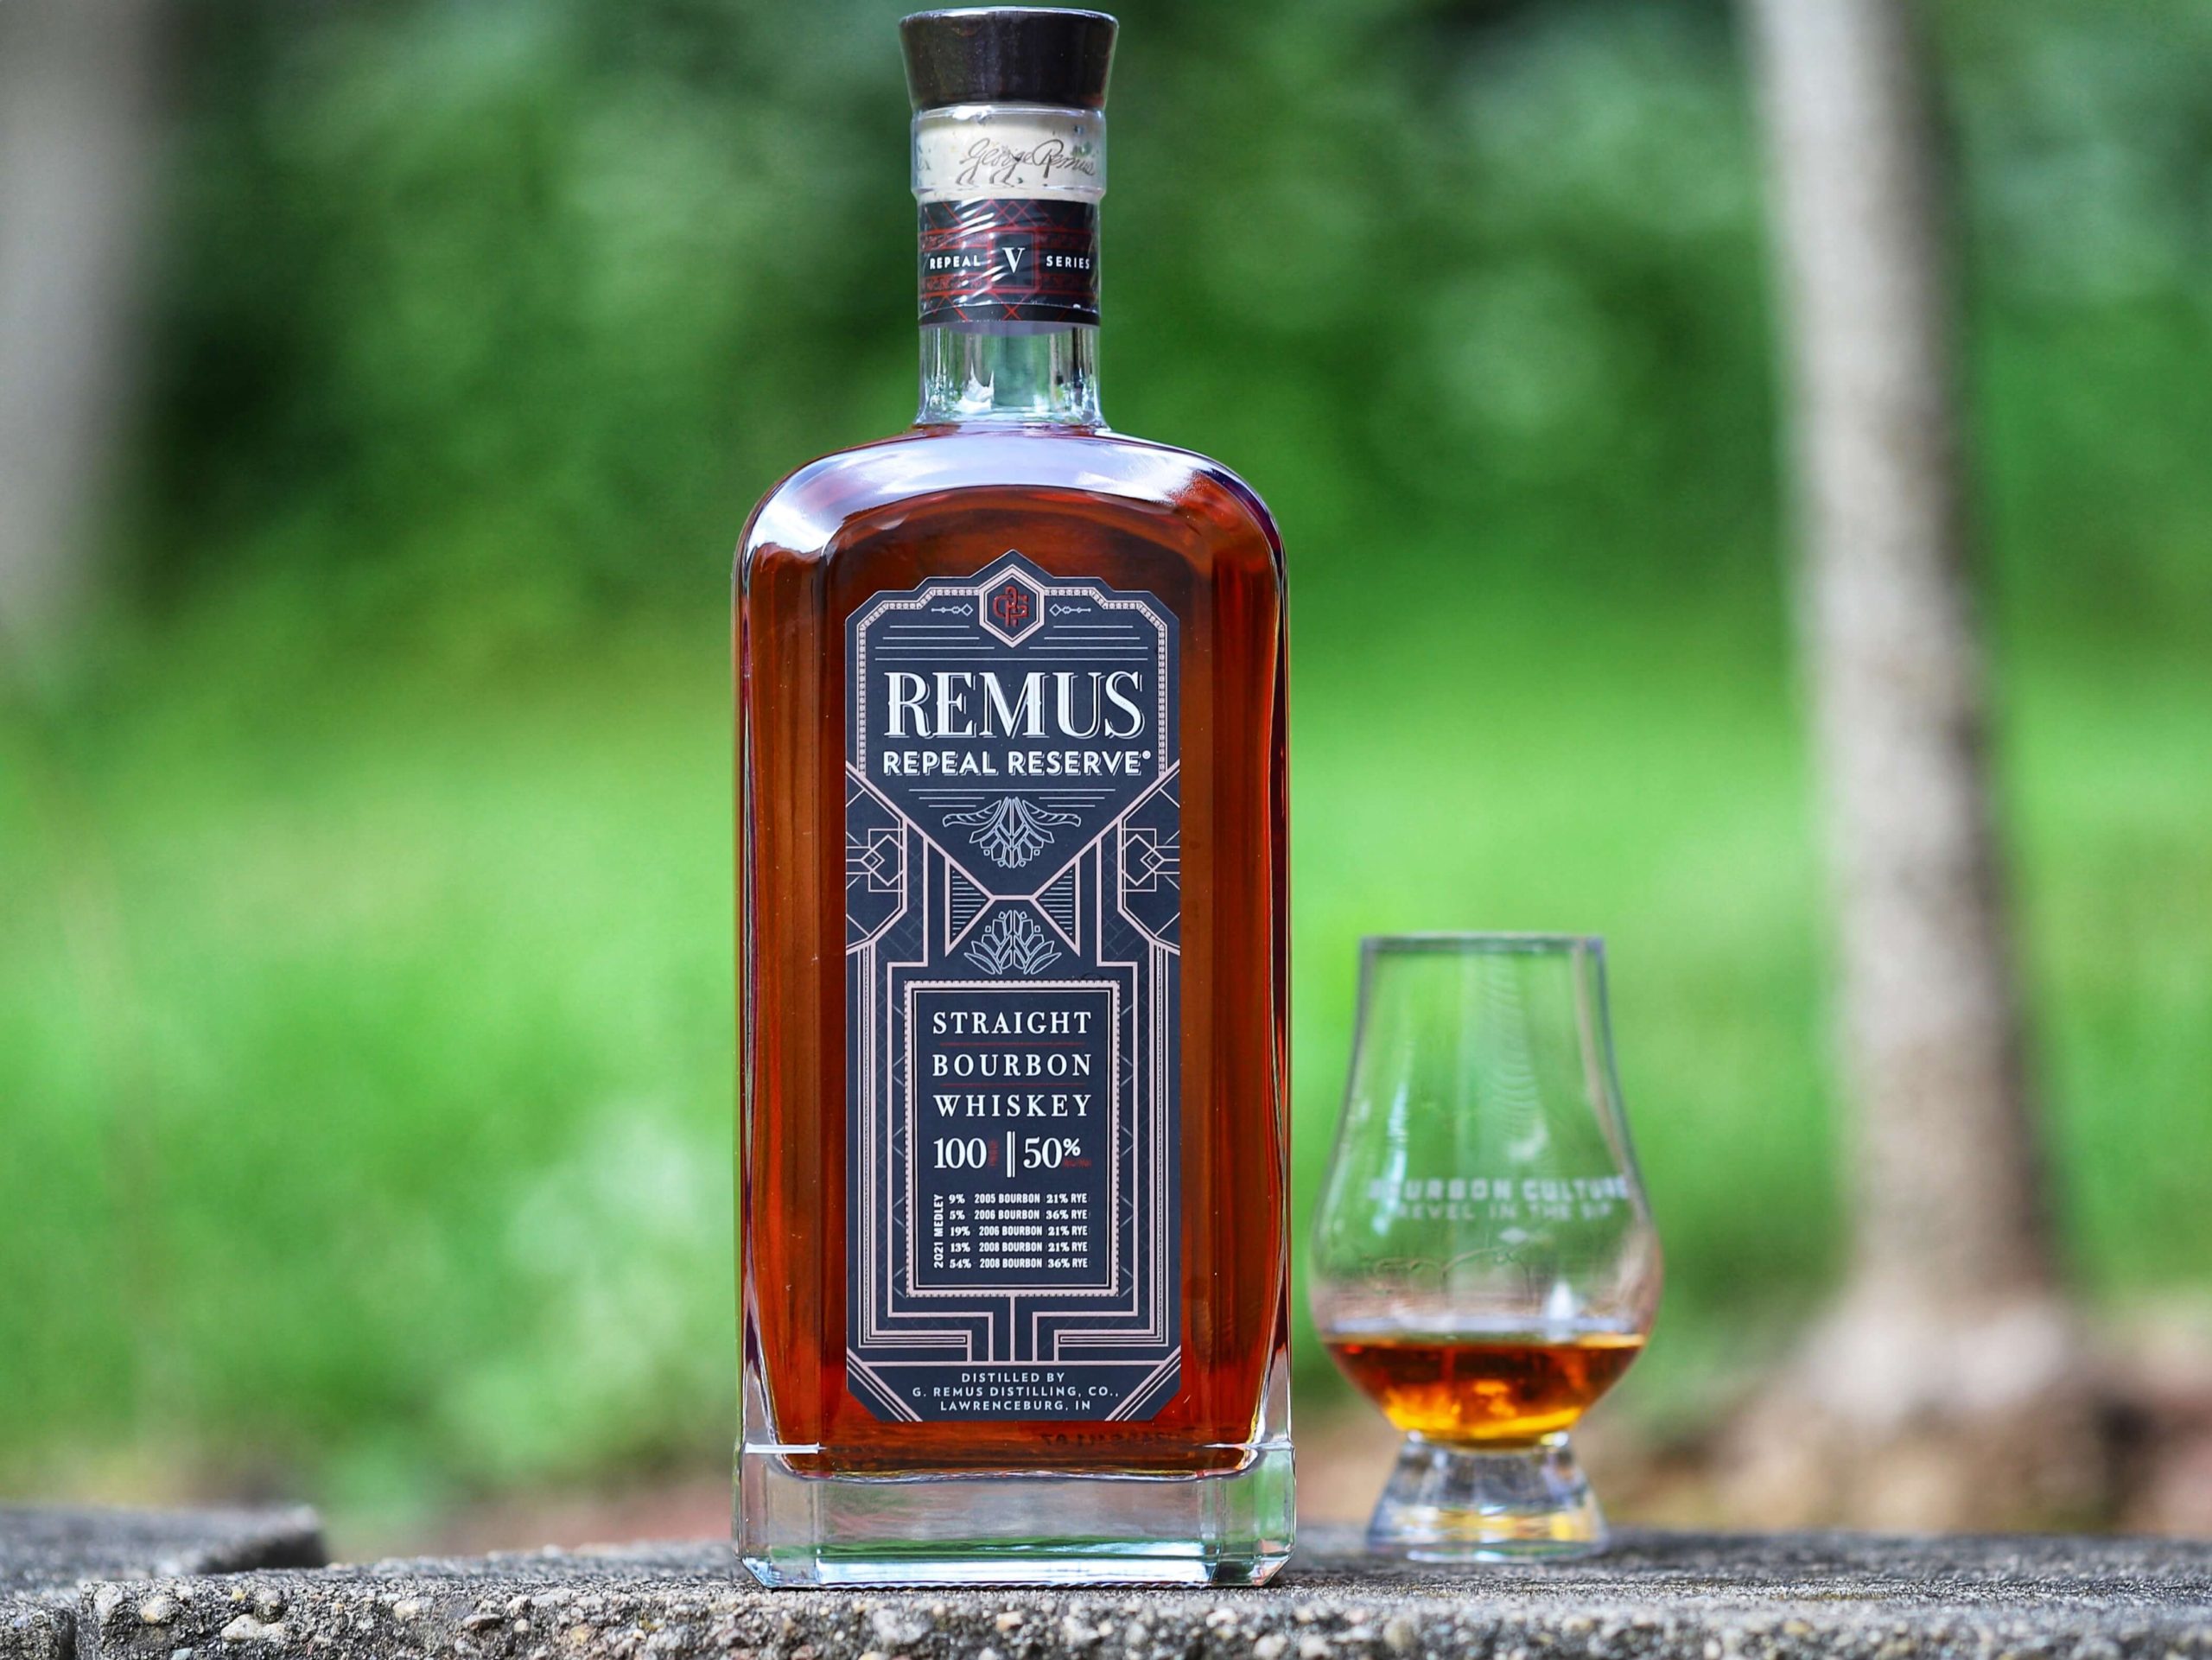 Remus Repeal Reserve Straight Bourbon Whiskey (Batch 5) Review